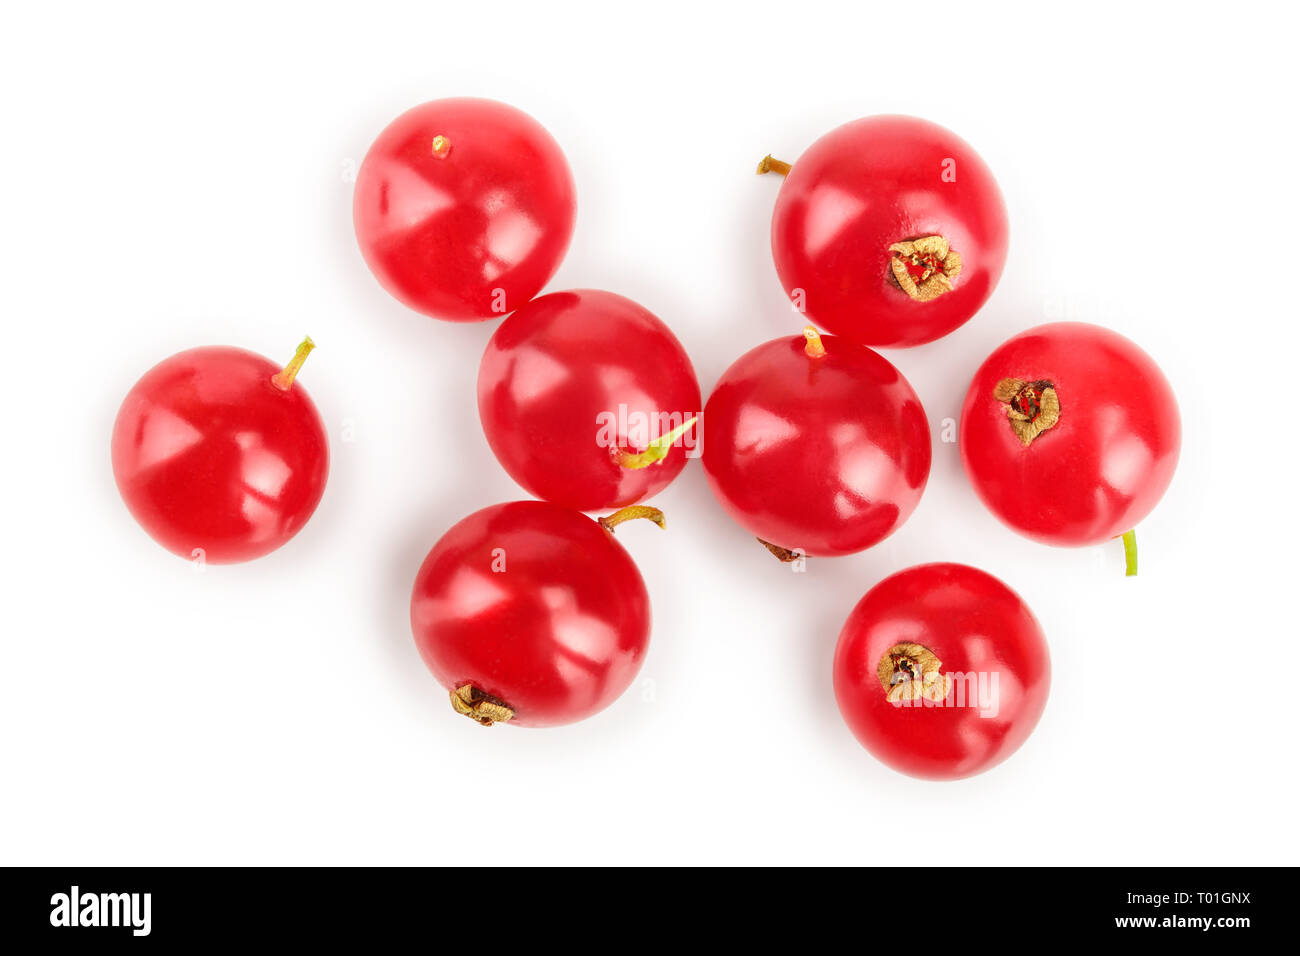 Red currant berry isolated on white background. Top view. Flat lay pattern. Stock Photo